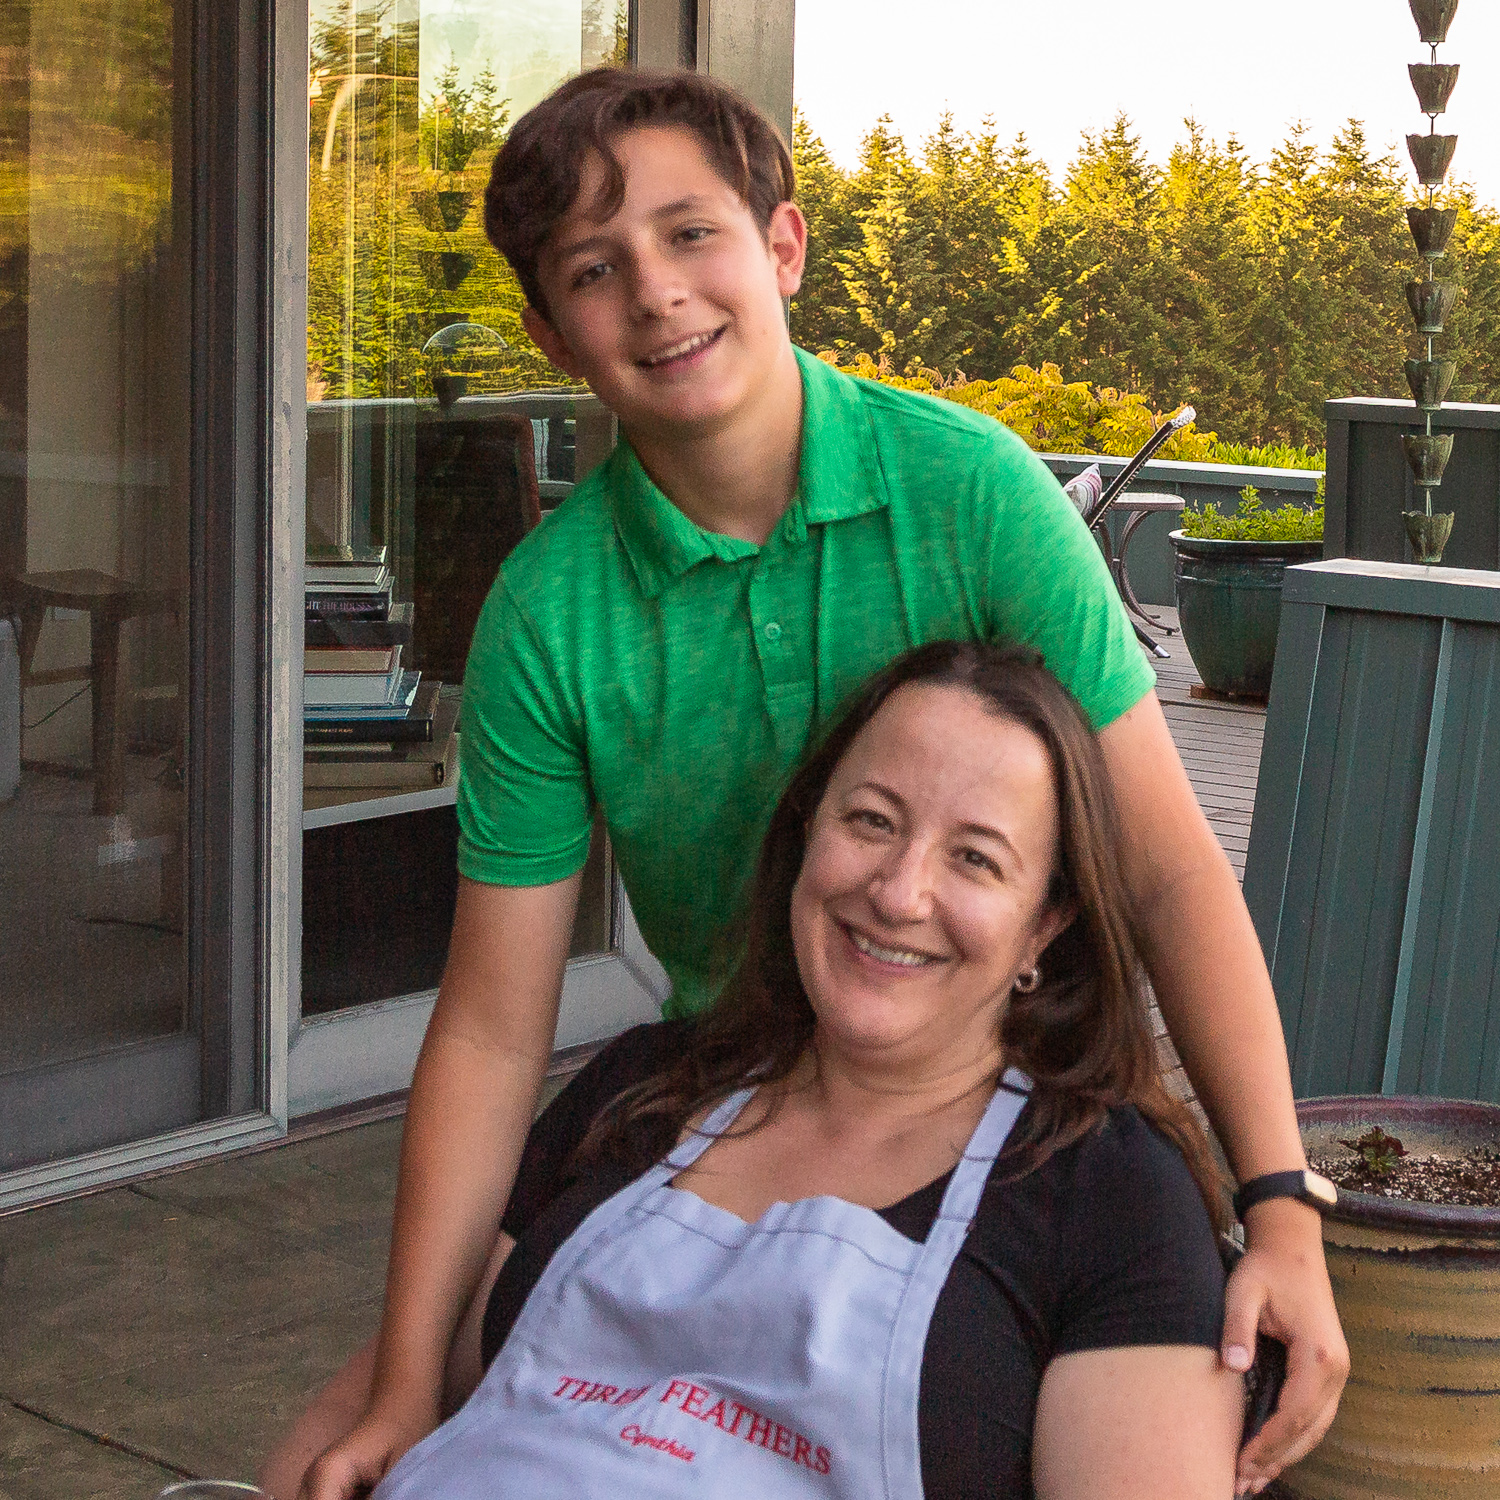 Cynthia Stimac and her son Torio at the Three Feathers 4th annual Memorial Weekend Wine Tasting event.